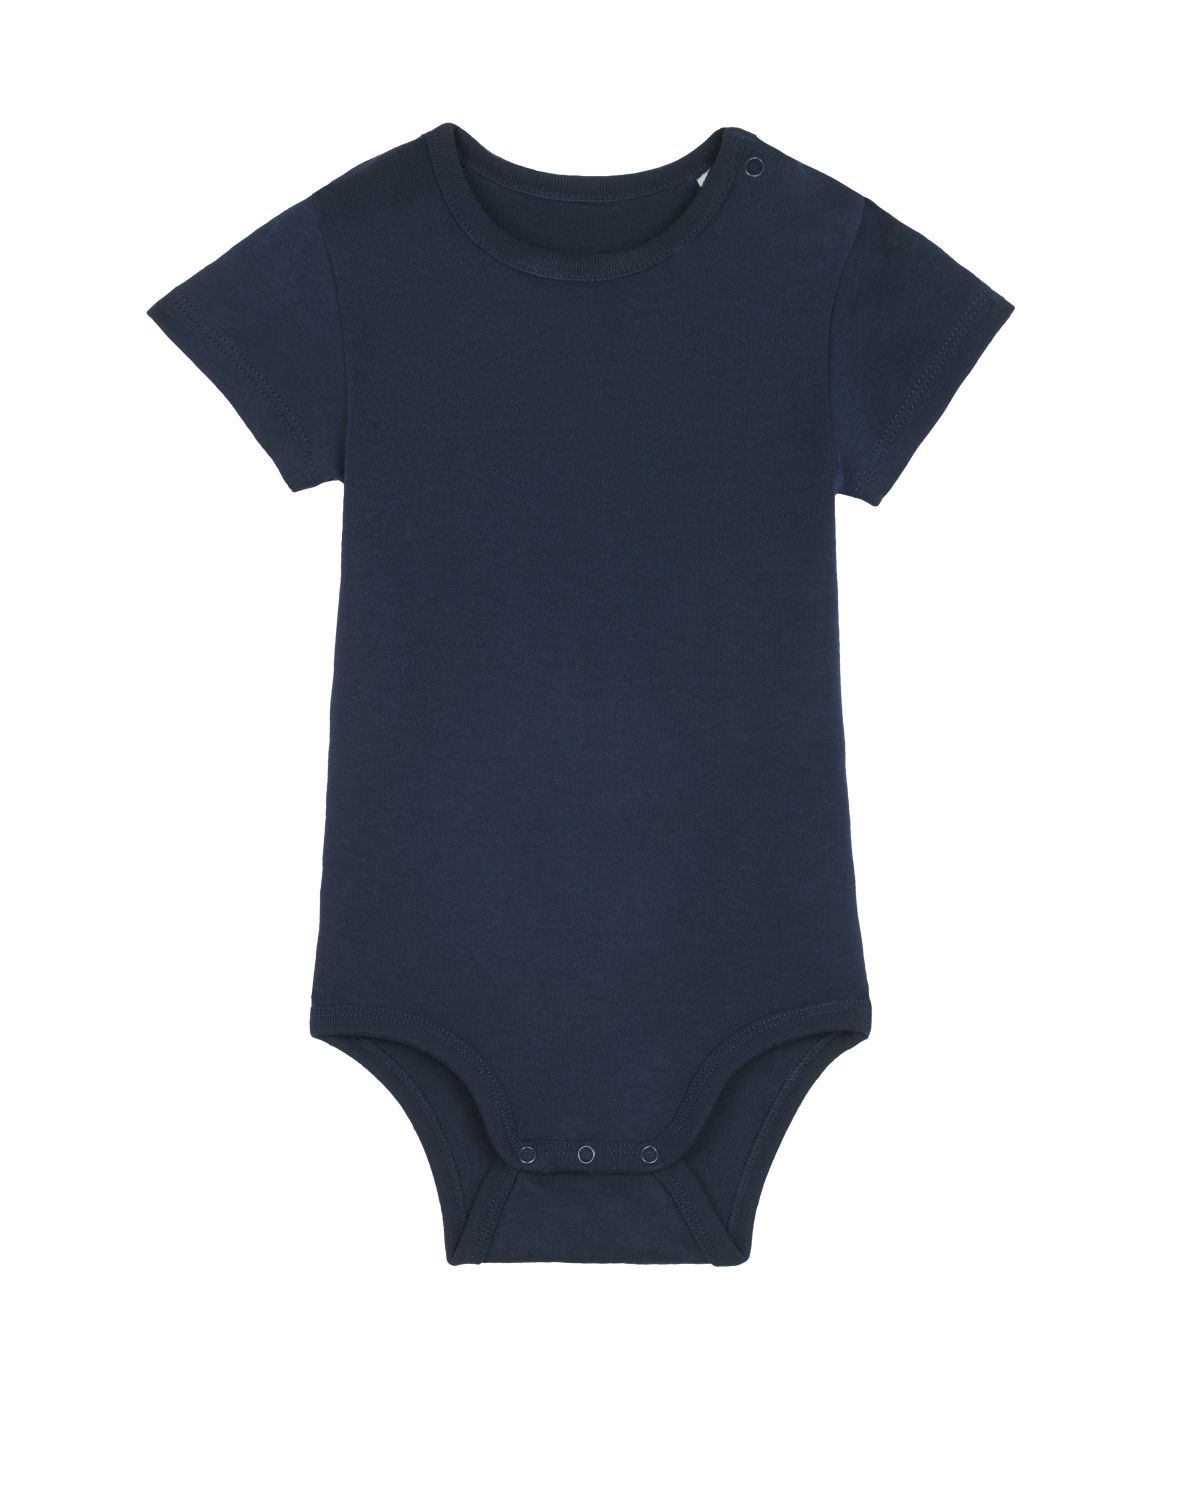 Baby Body "Moin Baby" Navy/Neonblau